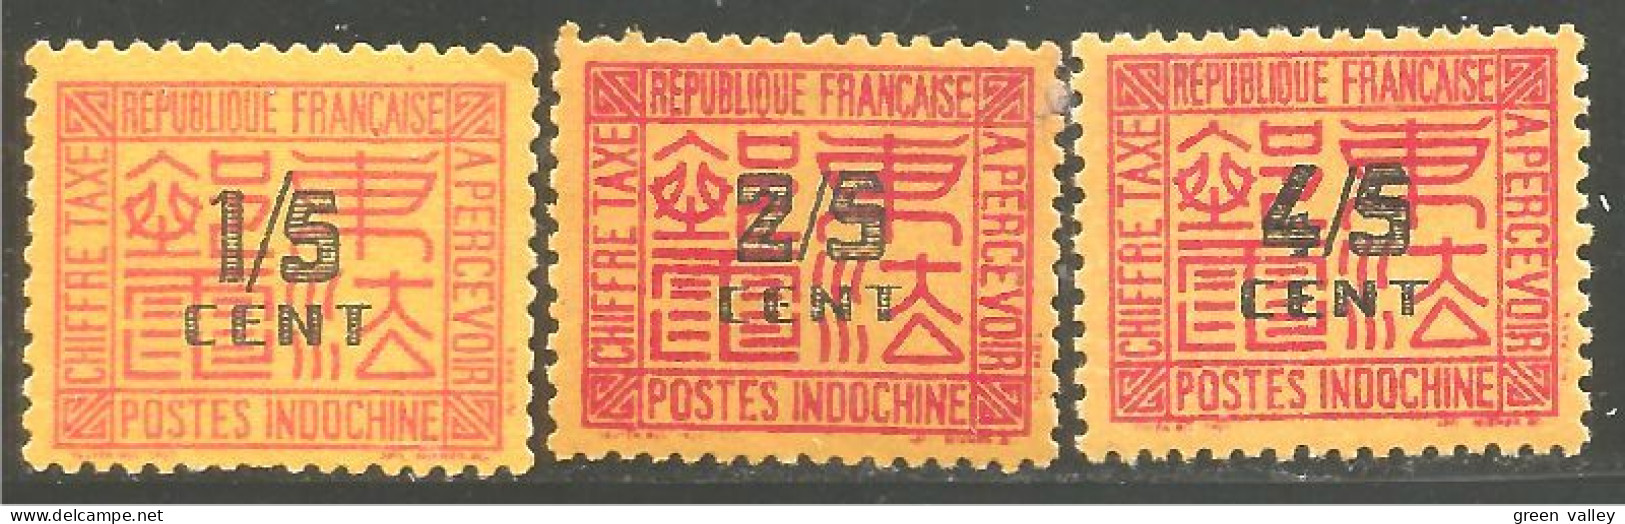 379 Indochine Taxe 1931 MH * Neuf (f3-CHI-79) - Unused Stamps